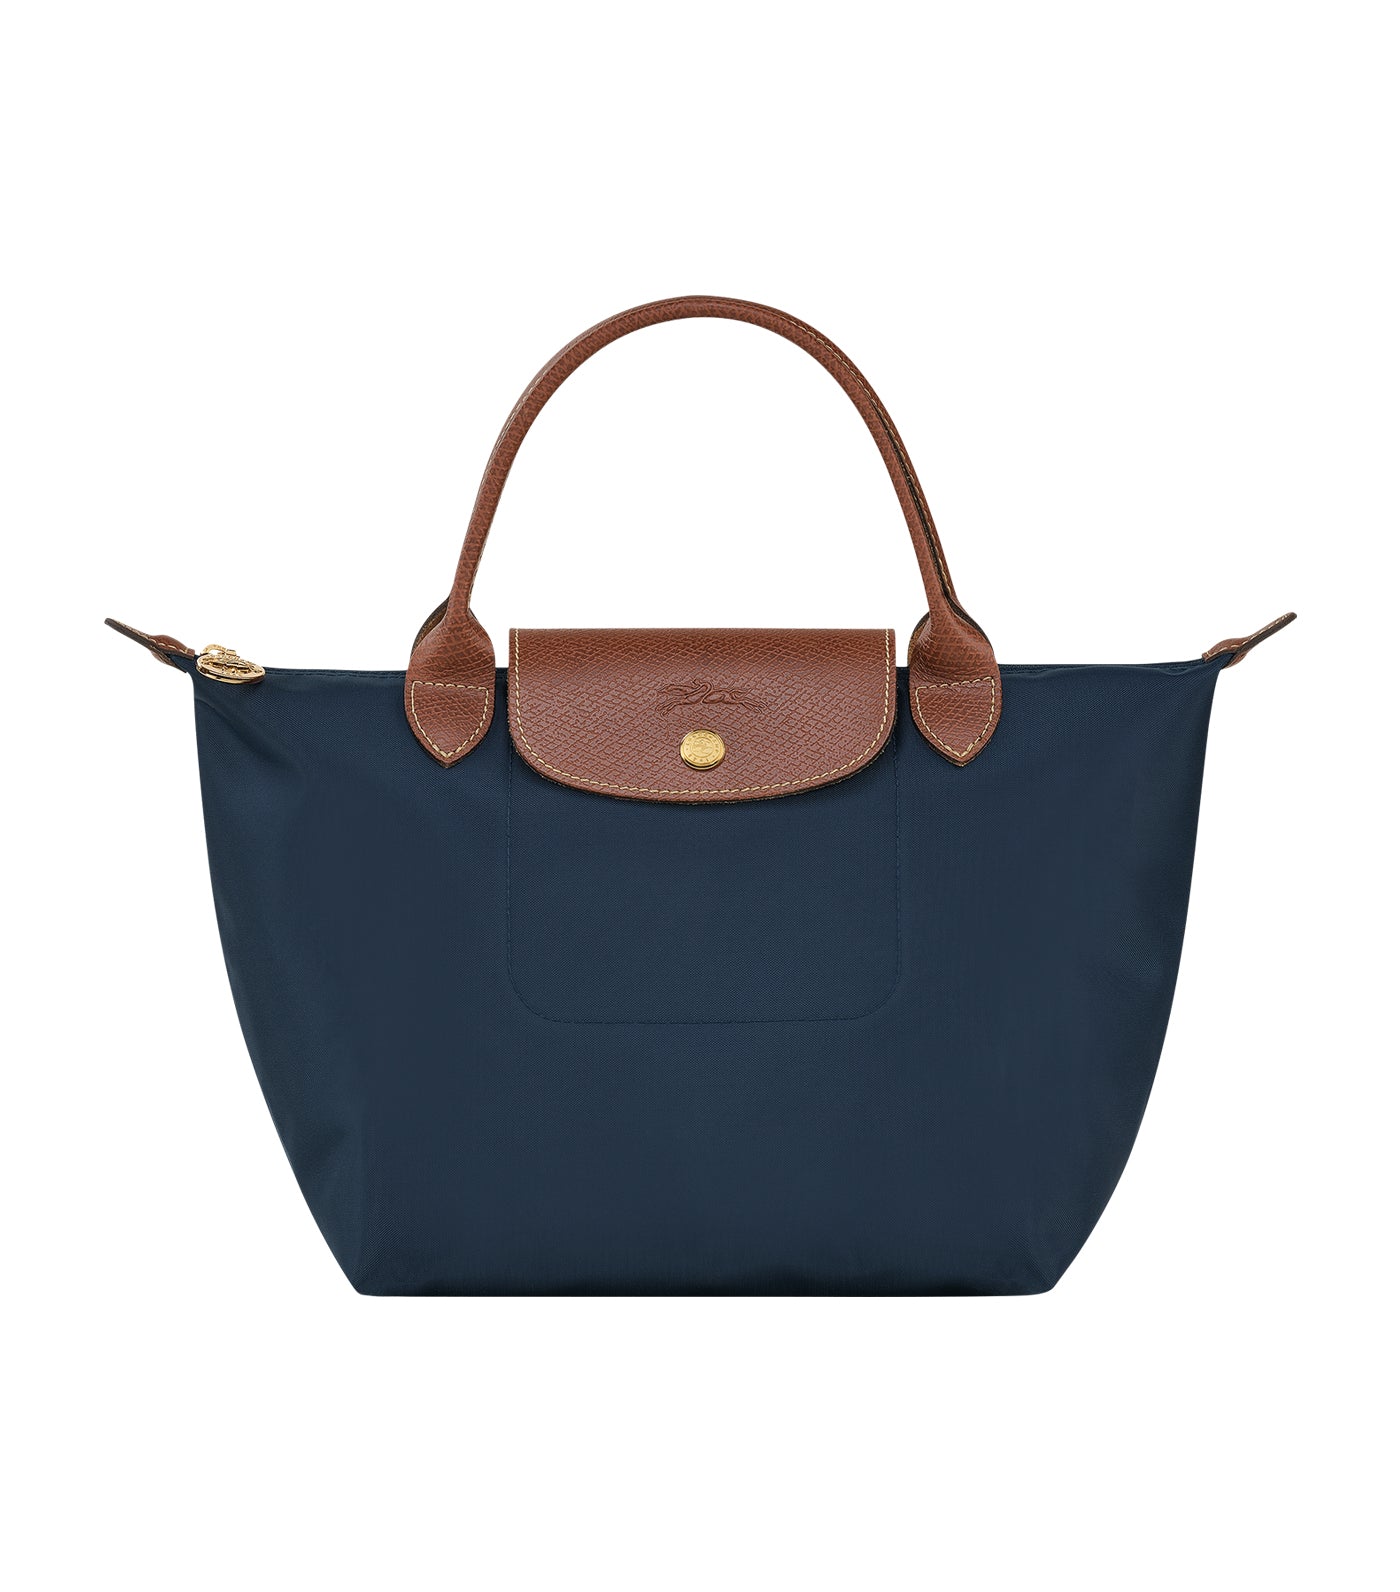 Longchamp Has A Le Pliage Bag That Comes With One Handle - BAGAHOLICBOY